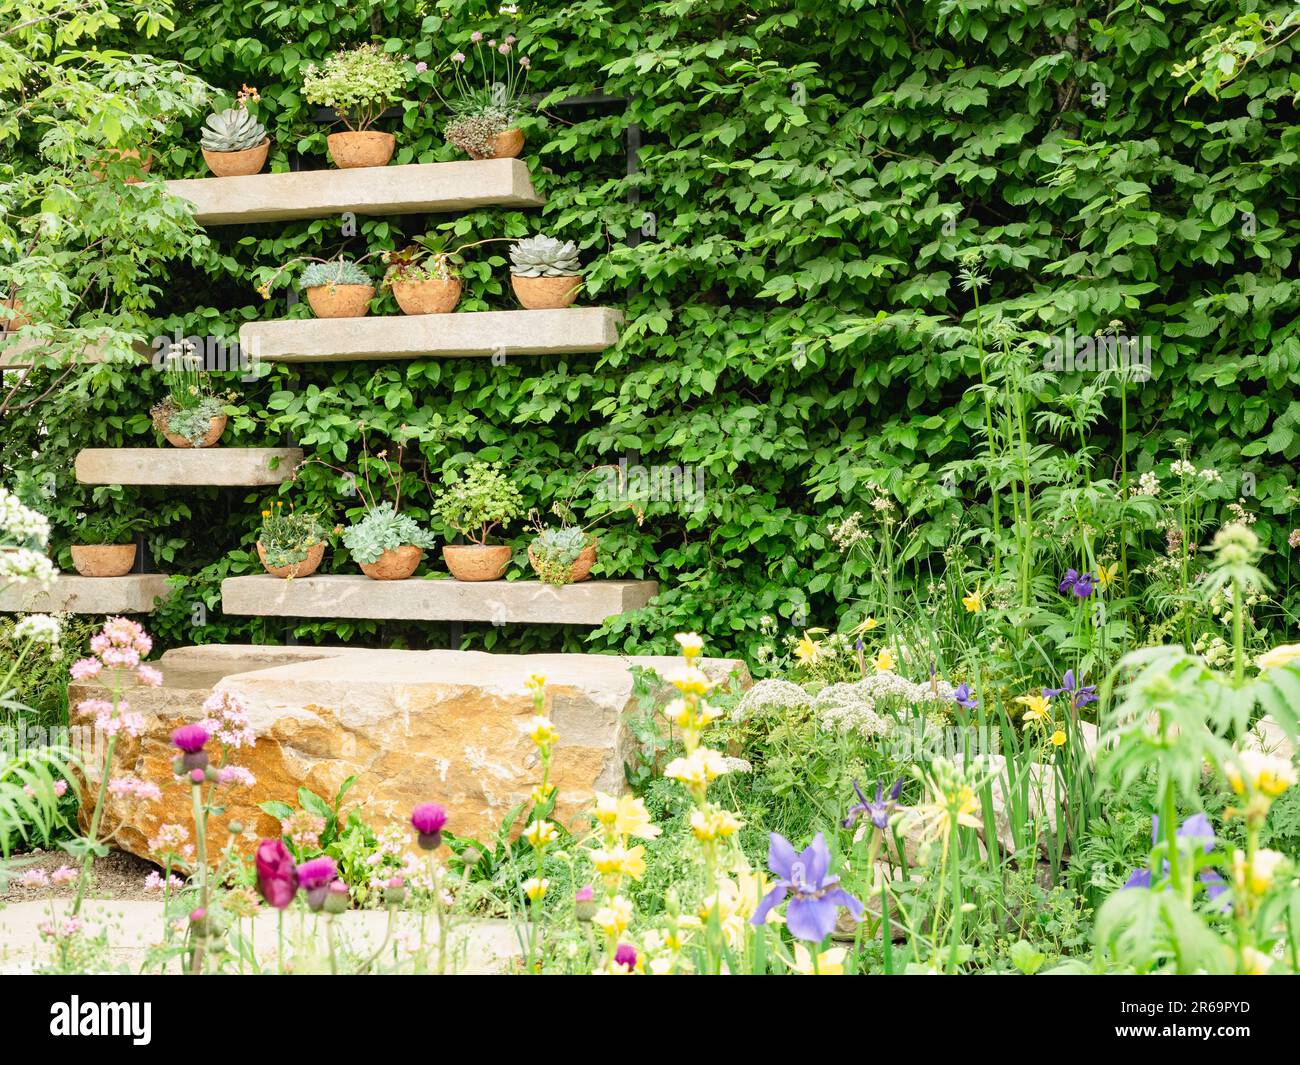 Part of a garden at Chelsea Flower Show Stock Photo